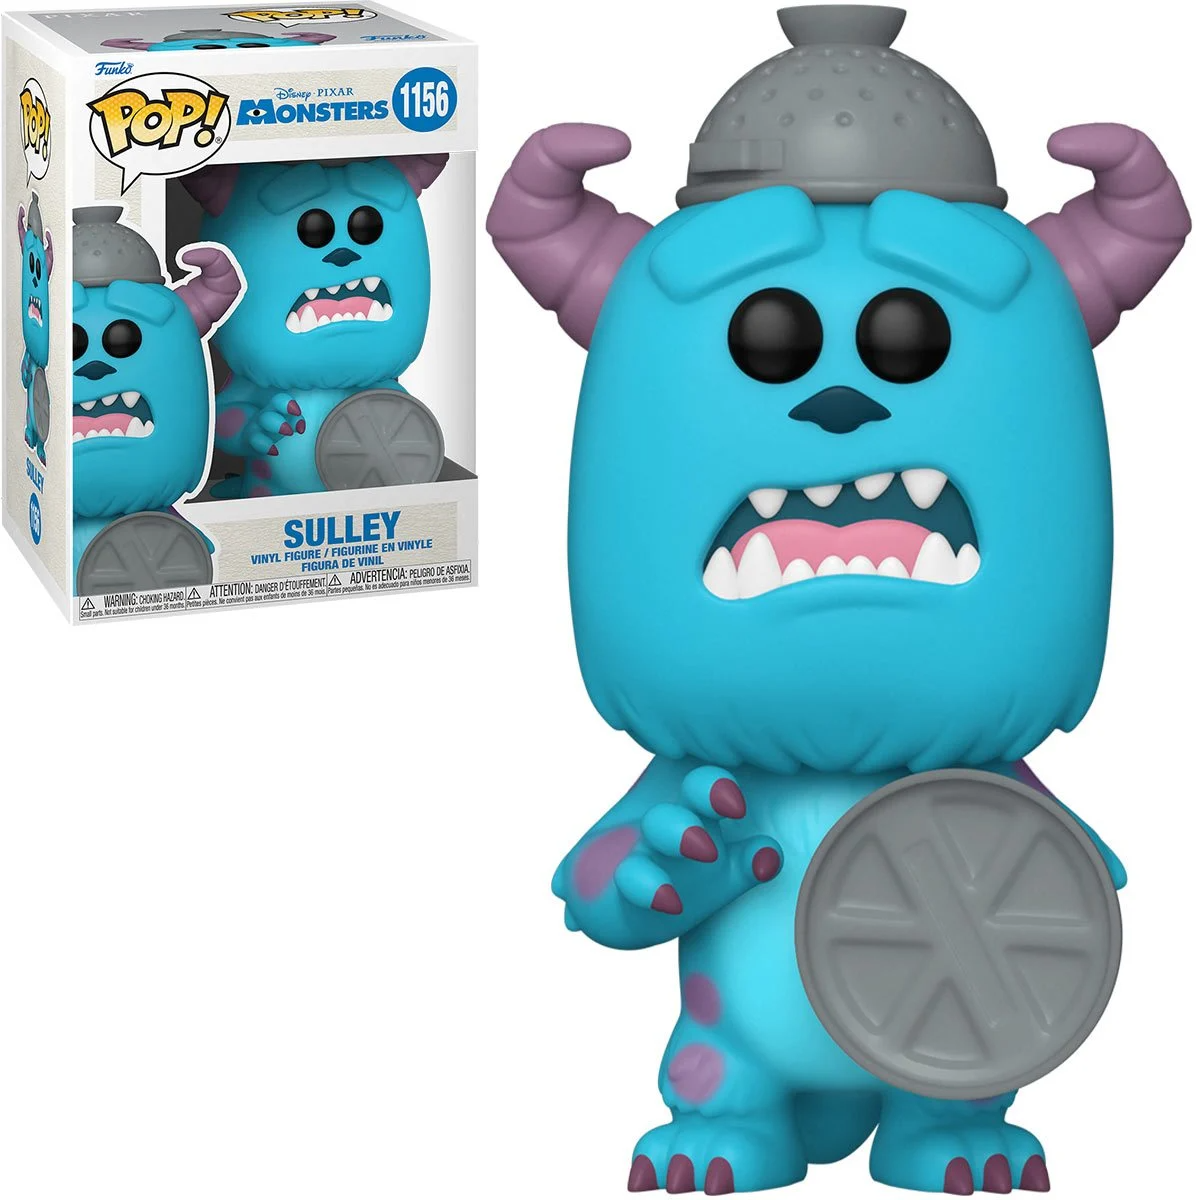 Funko Pop! Monsters, Inc. 20Th Anniversary Sulley With Lid Vinyl Figure #1156